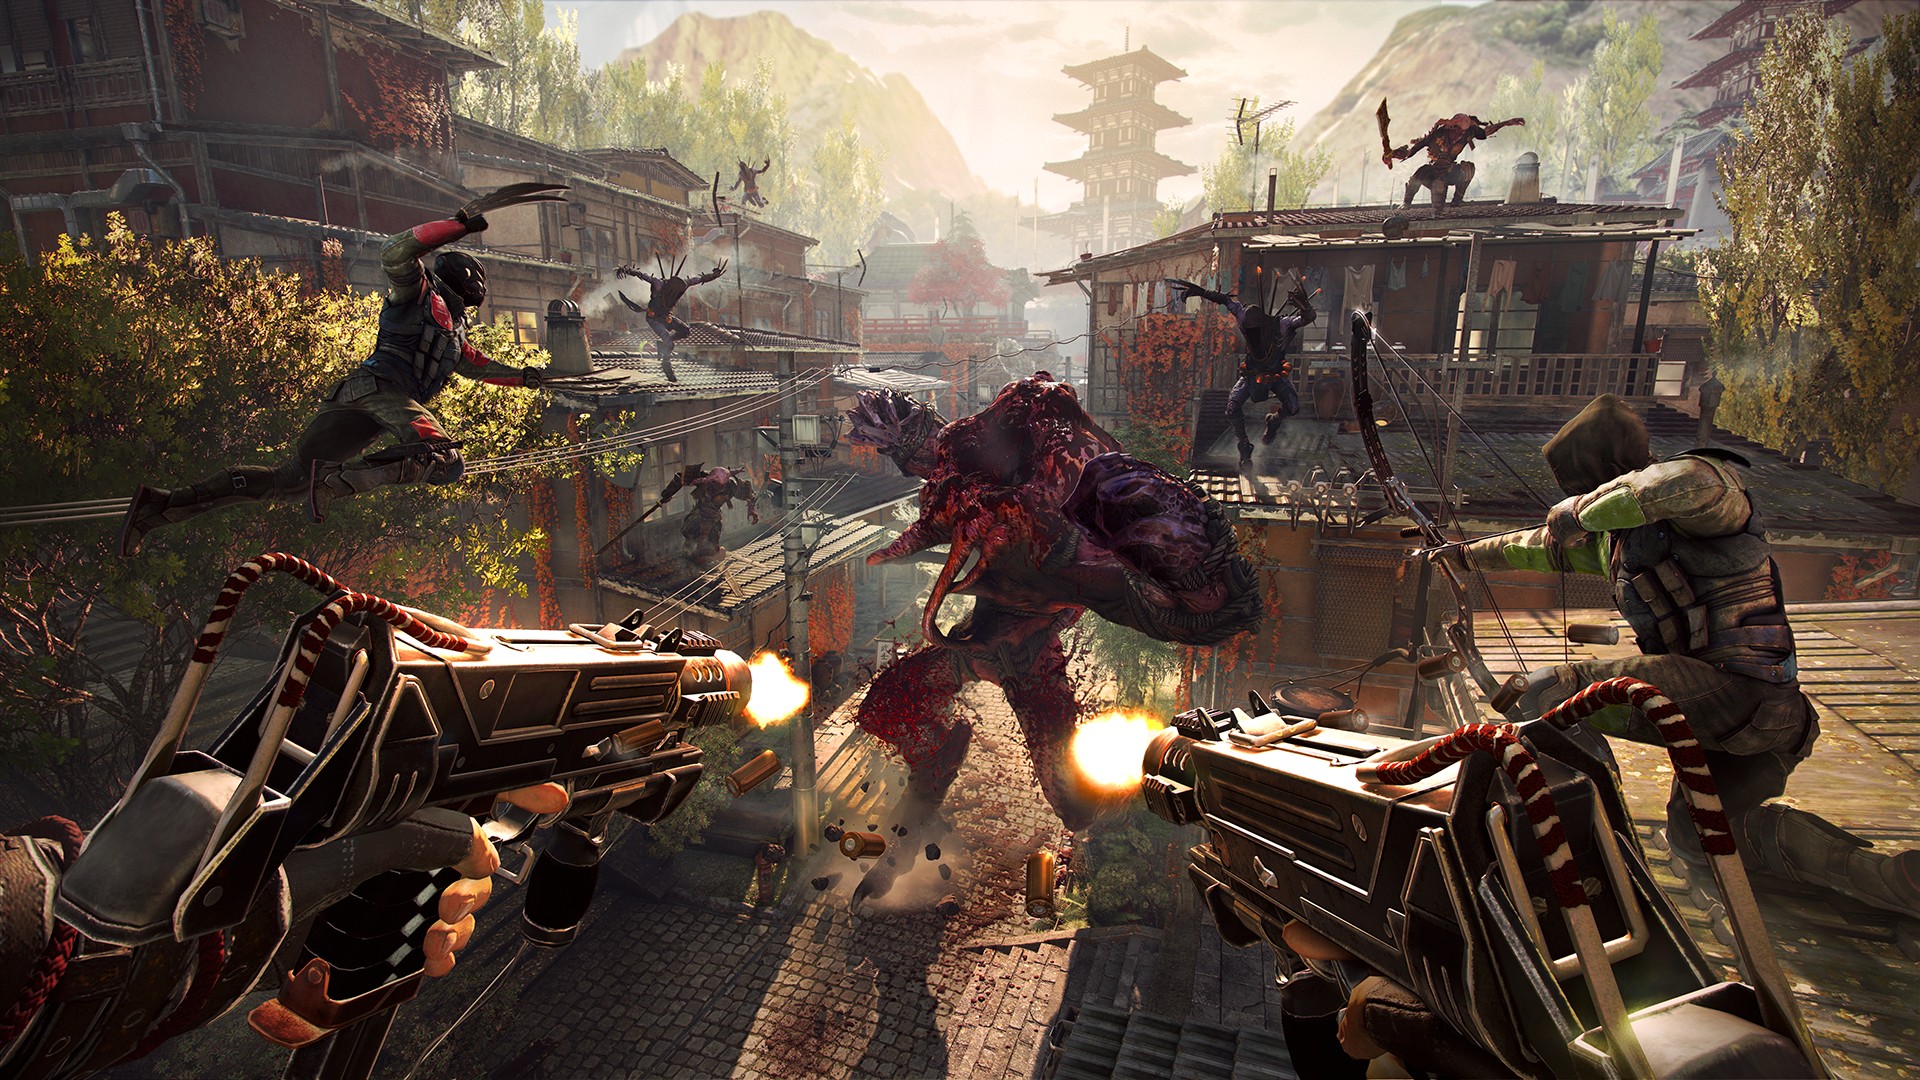 Amazing Shadow Warrior 2 Pictures & Backgrounds